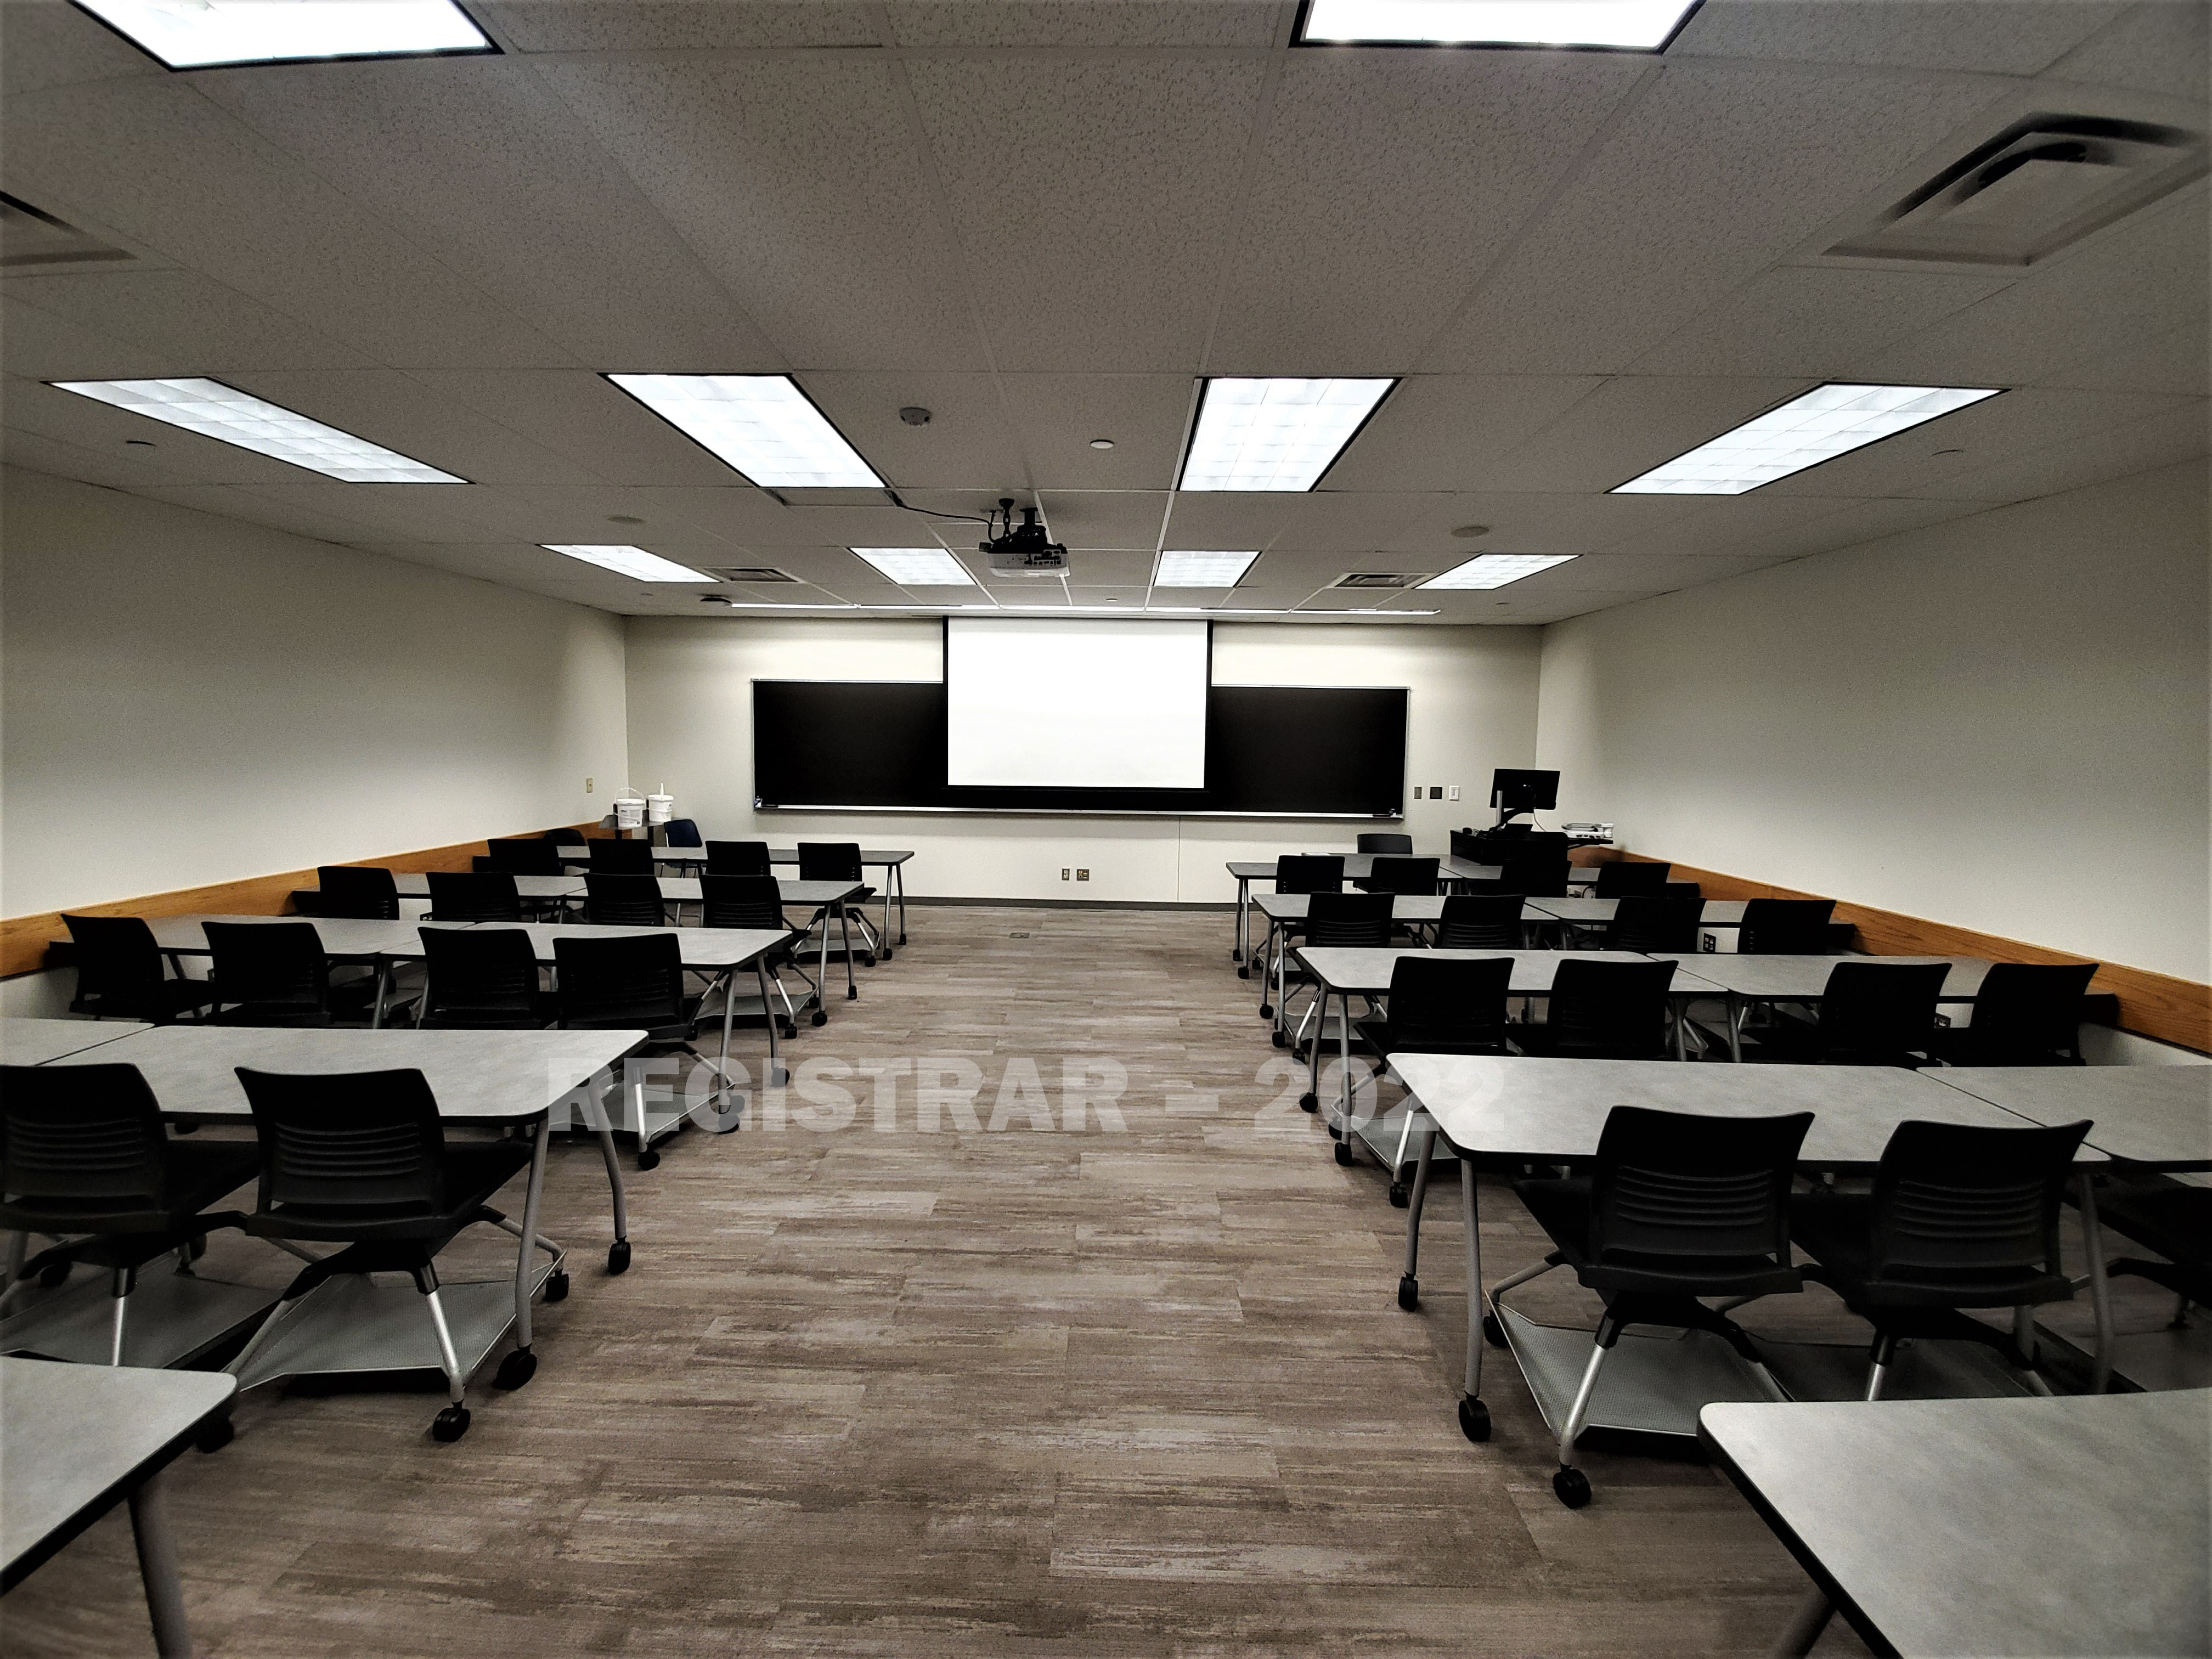 Dreese Lab room 264 ultra wide angle view from the back of the room with projector screen down